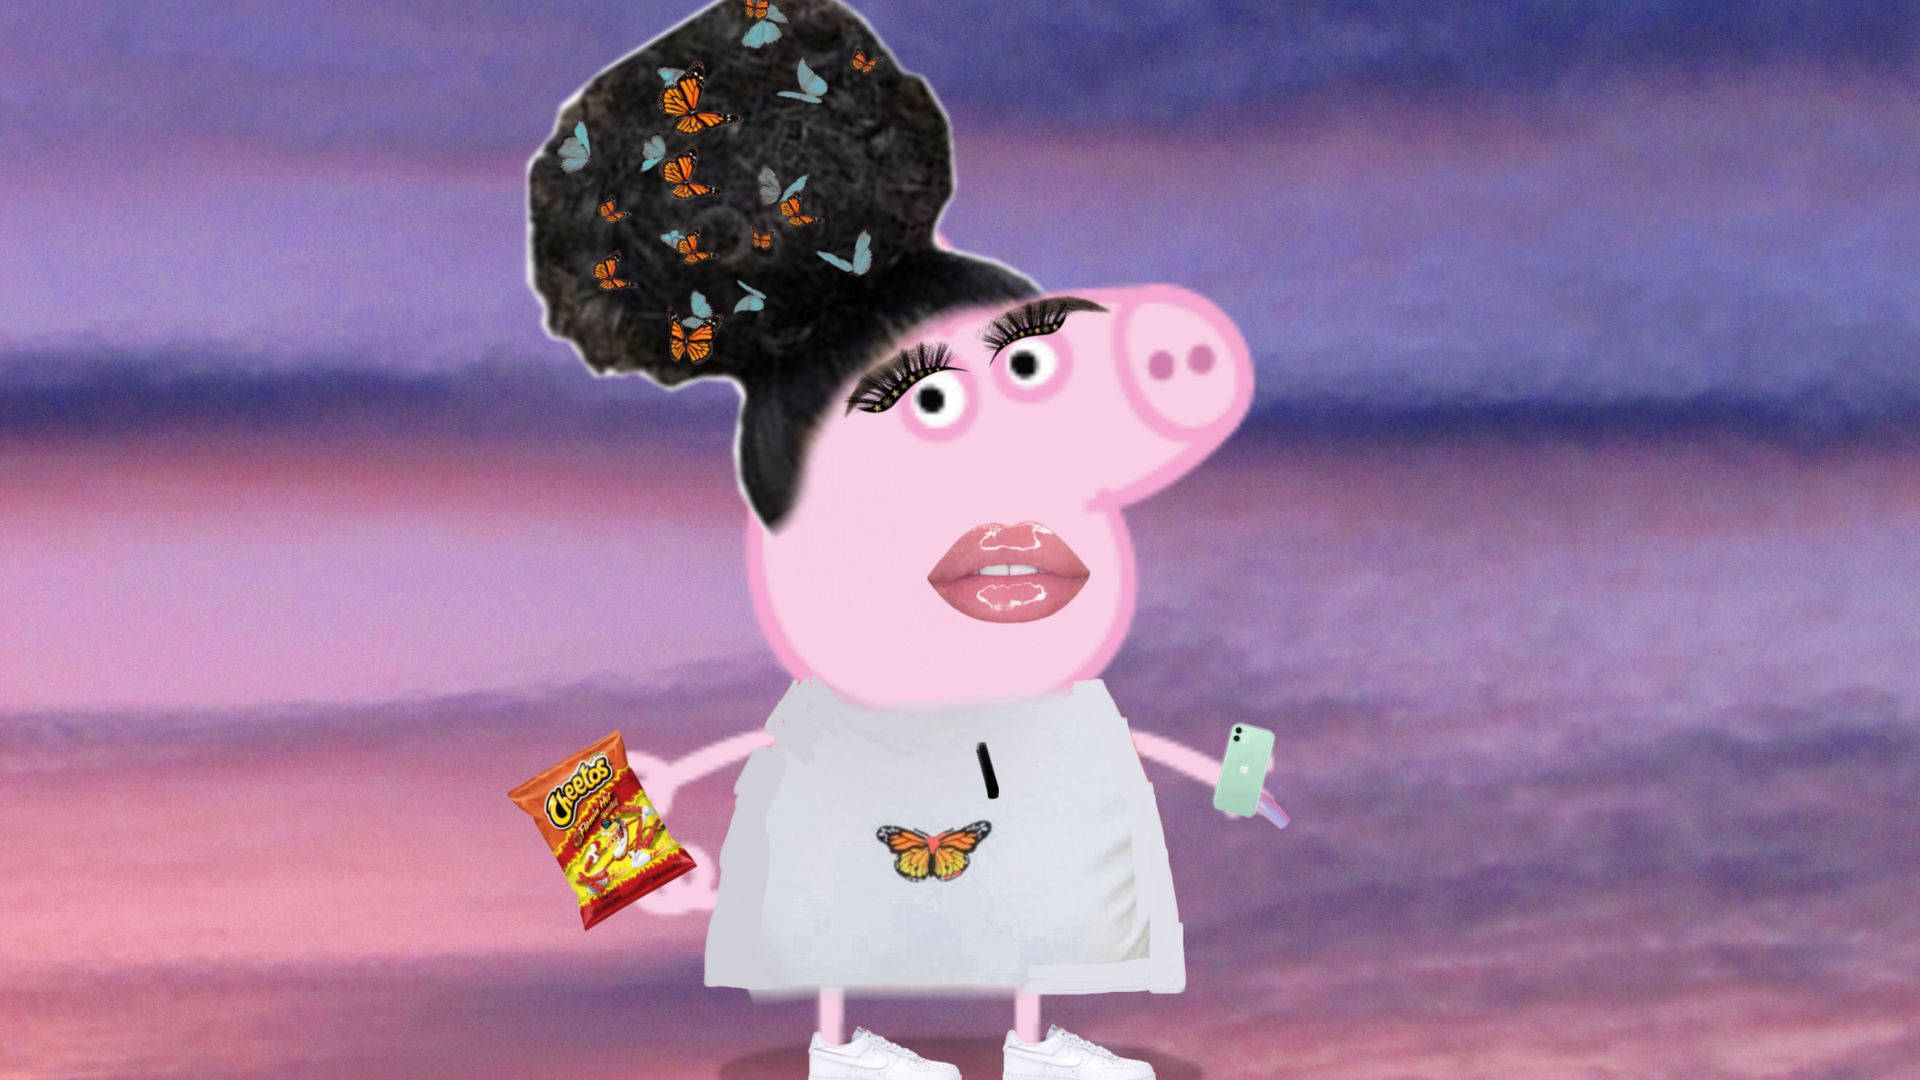 A digital collage of a pink pig head character holding a bag of cheetos and a smartphone. - Cheetos